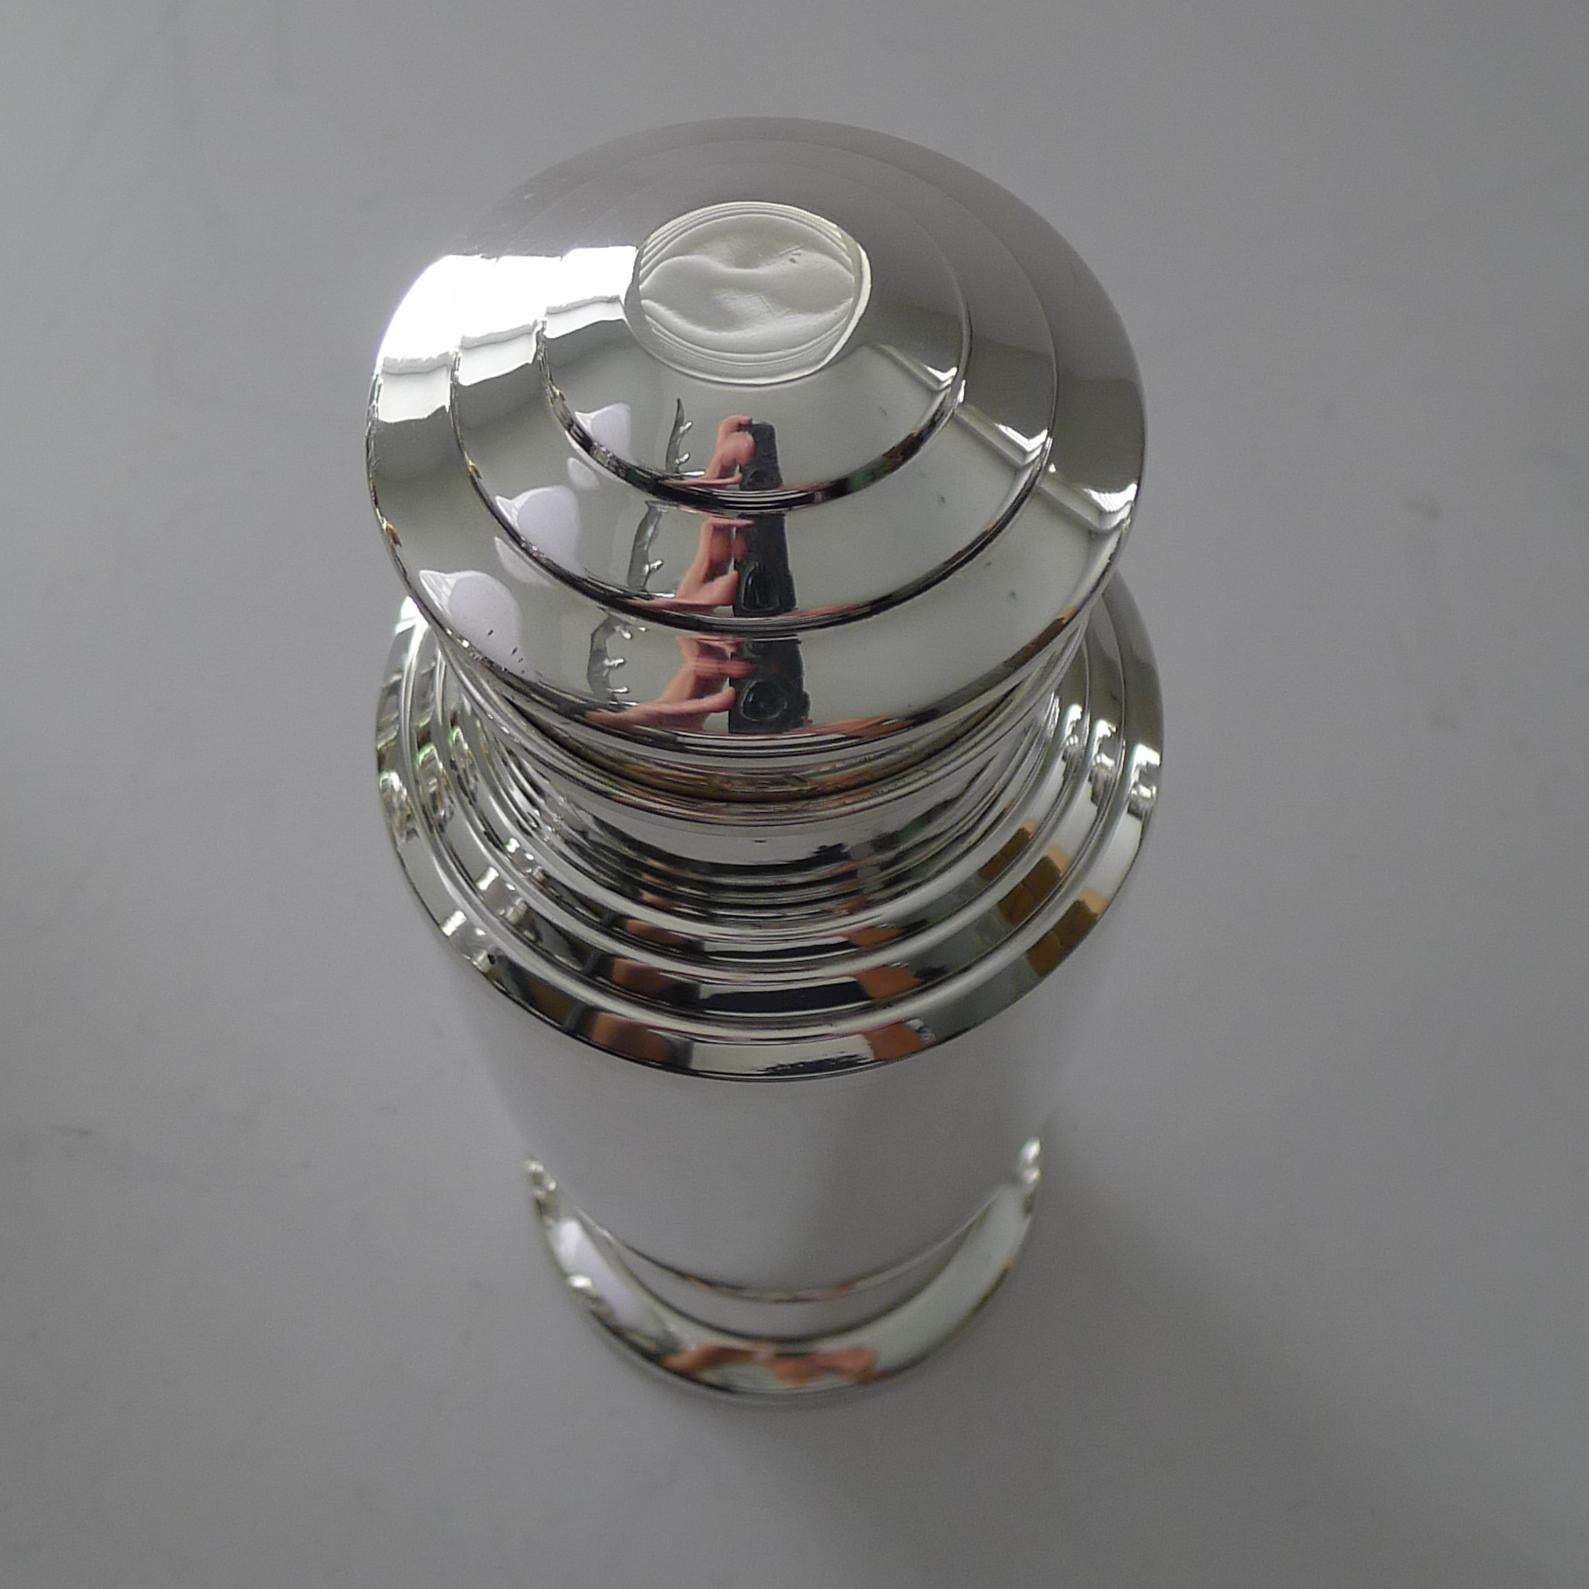 British Smart Art Deco Cocktail Shaker by Charles S Green C.1940 For Sale